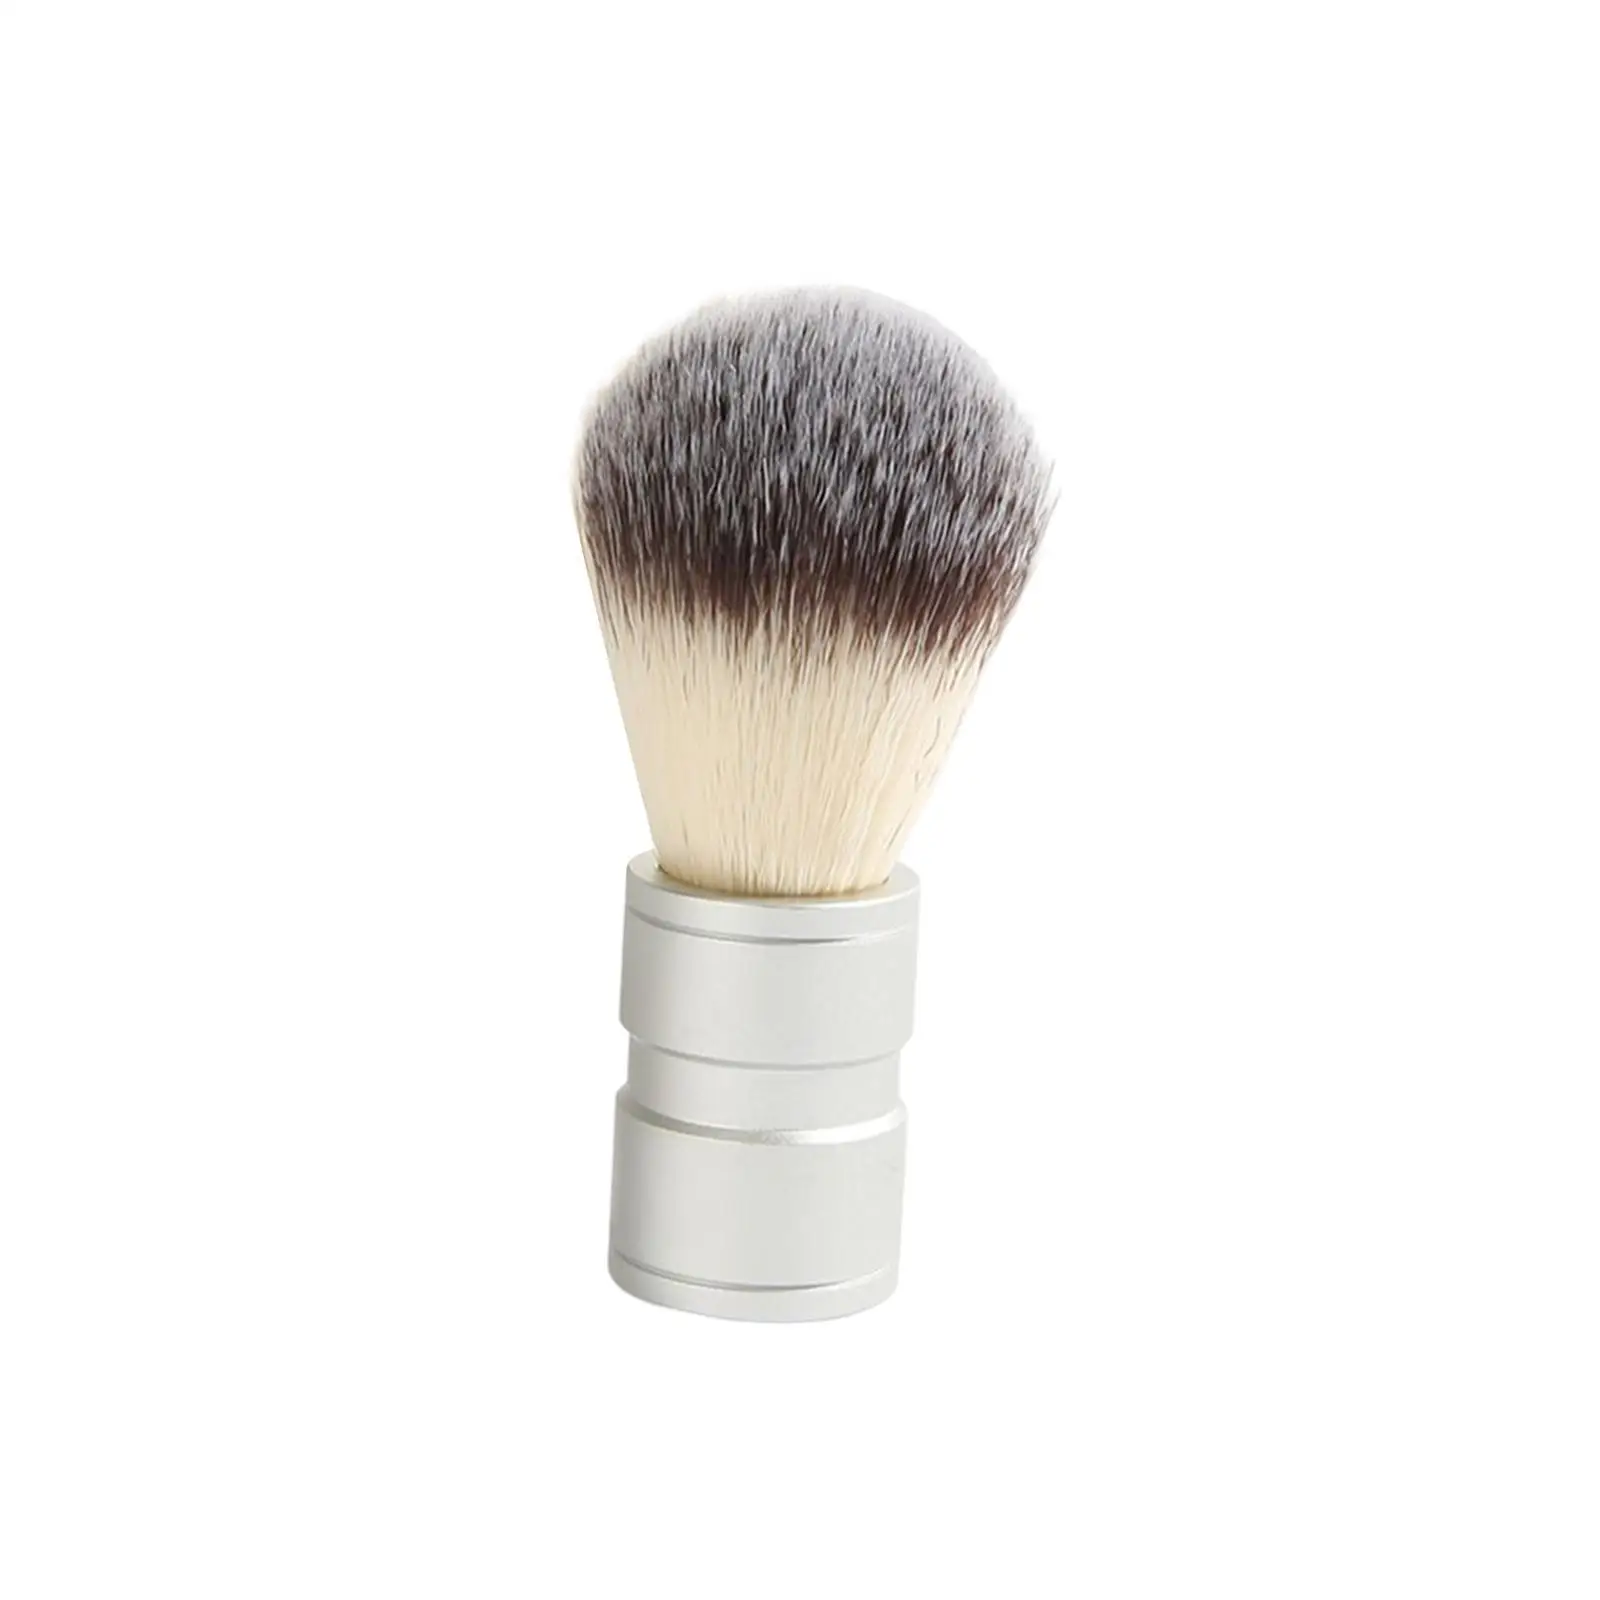 Professional Hair Shaving Brush Makeup Facial Brush Stainless Steel Handle Face Cleaning Hair Salon Brush for Festival Gifts